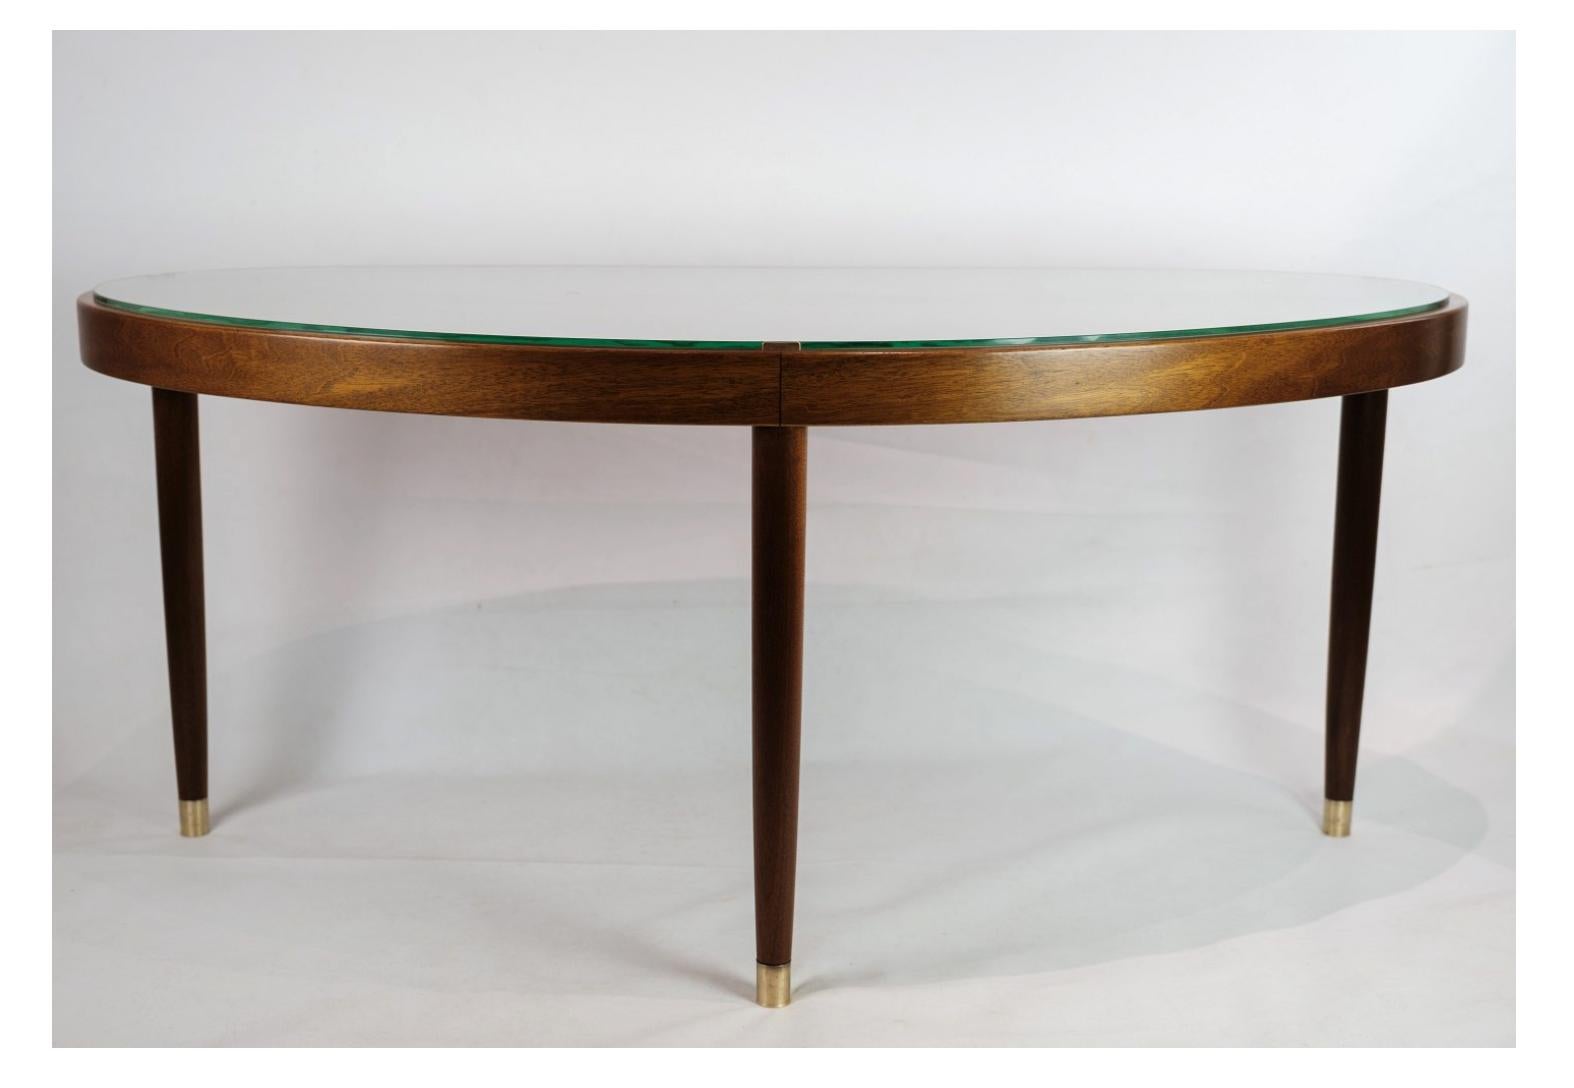 The coffee table, featuring a glass top and a walnut base, crafted by a Danish master carpenter in the 1940s, is a timeless piece of furniture that epitomizes the elegance and craftsmanship of mid-century Danish design.

The glass top lends a sleek